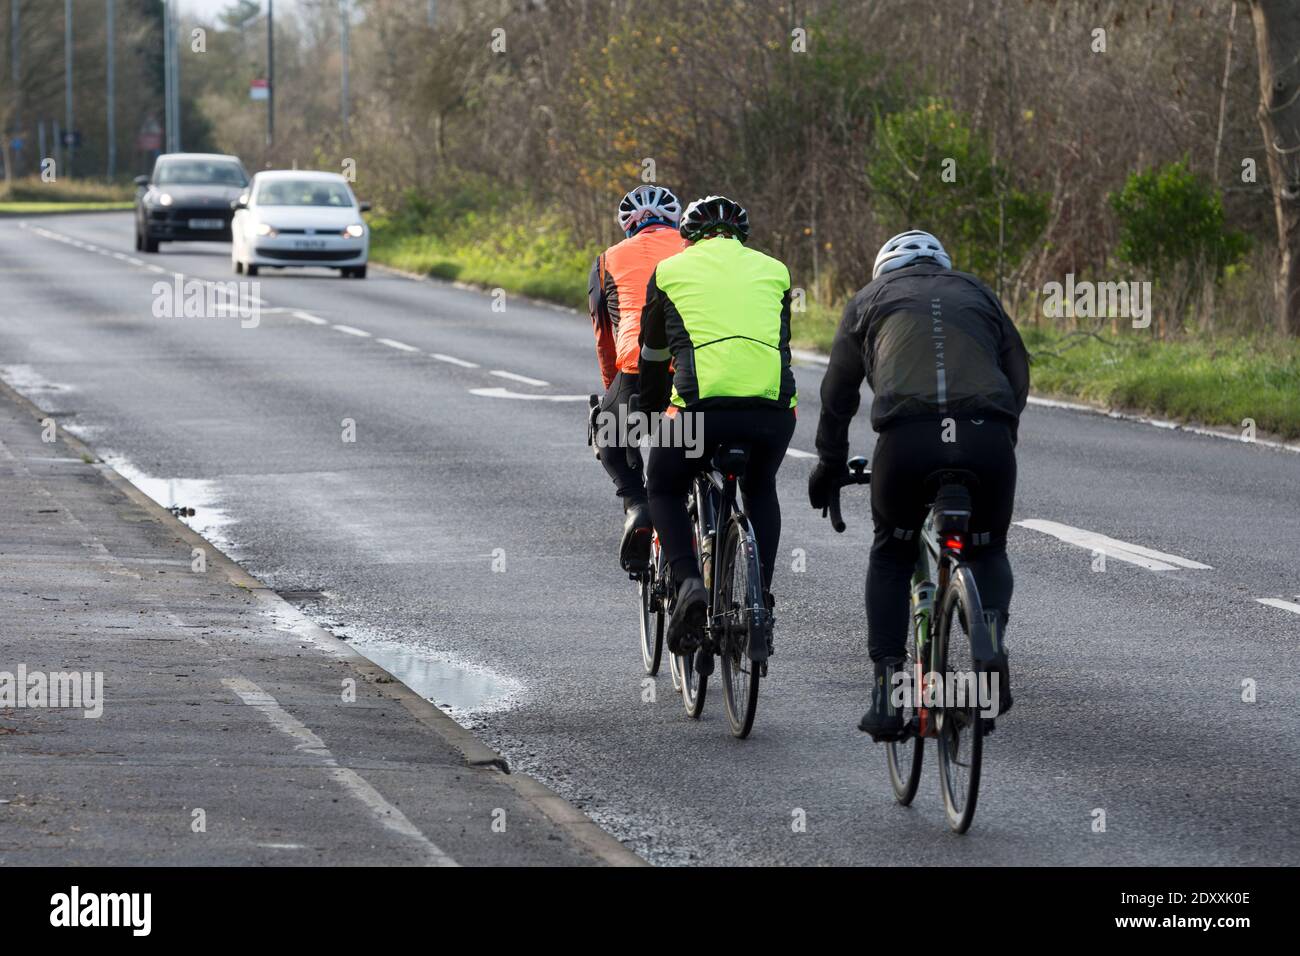 Rear view of male cyclists on a road in winter, Warwick, Warwickshire, England, UK Stock Photo